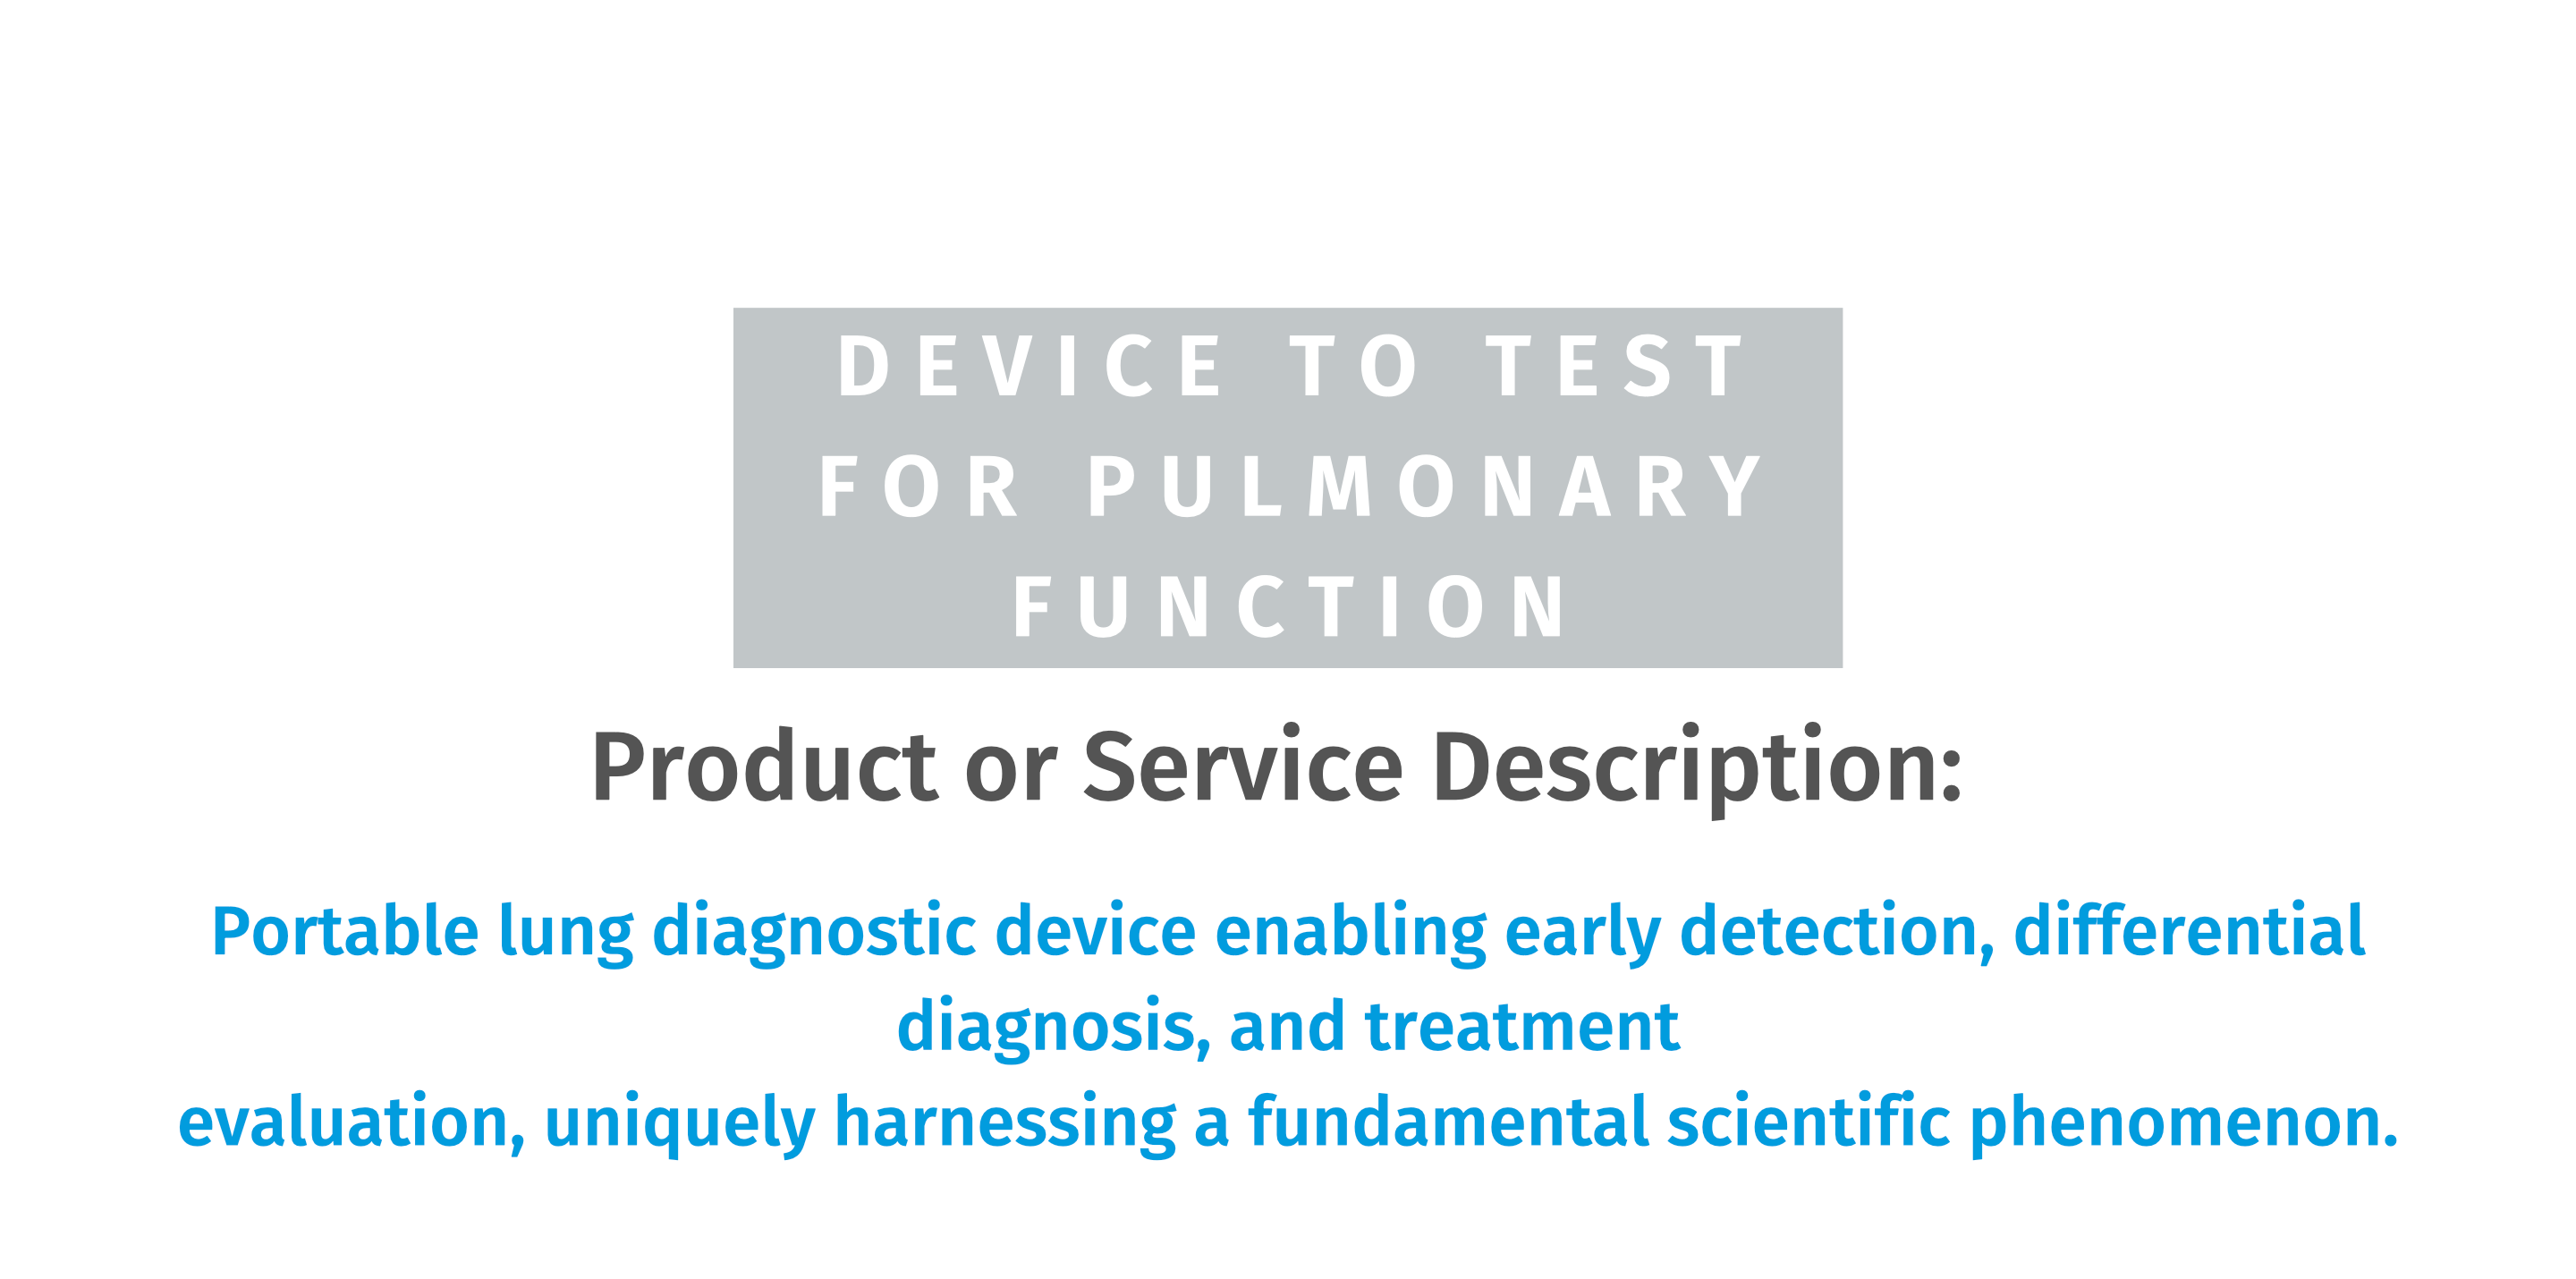 Device to Test for Pulmonary Function